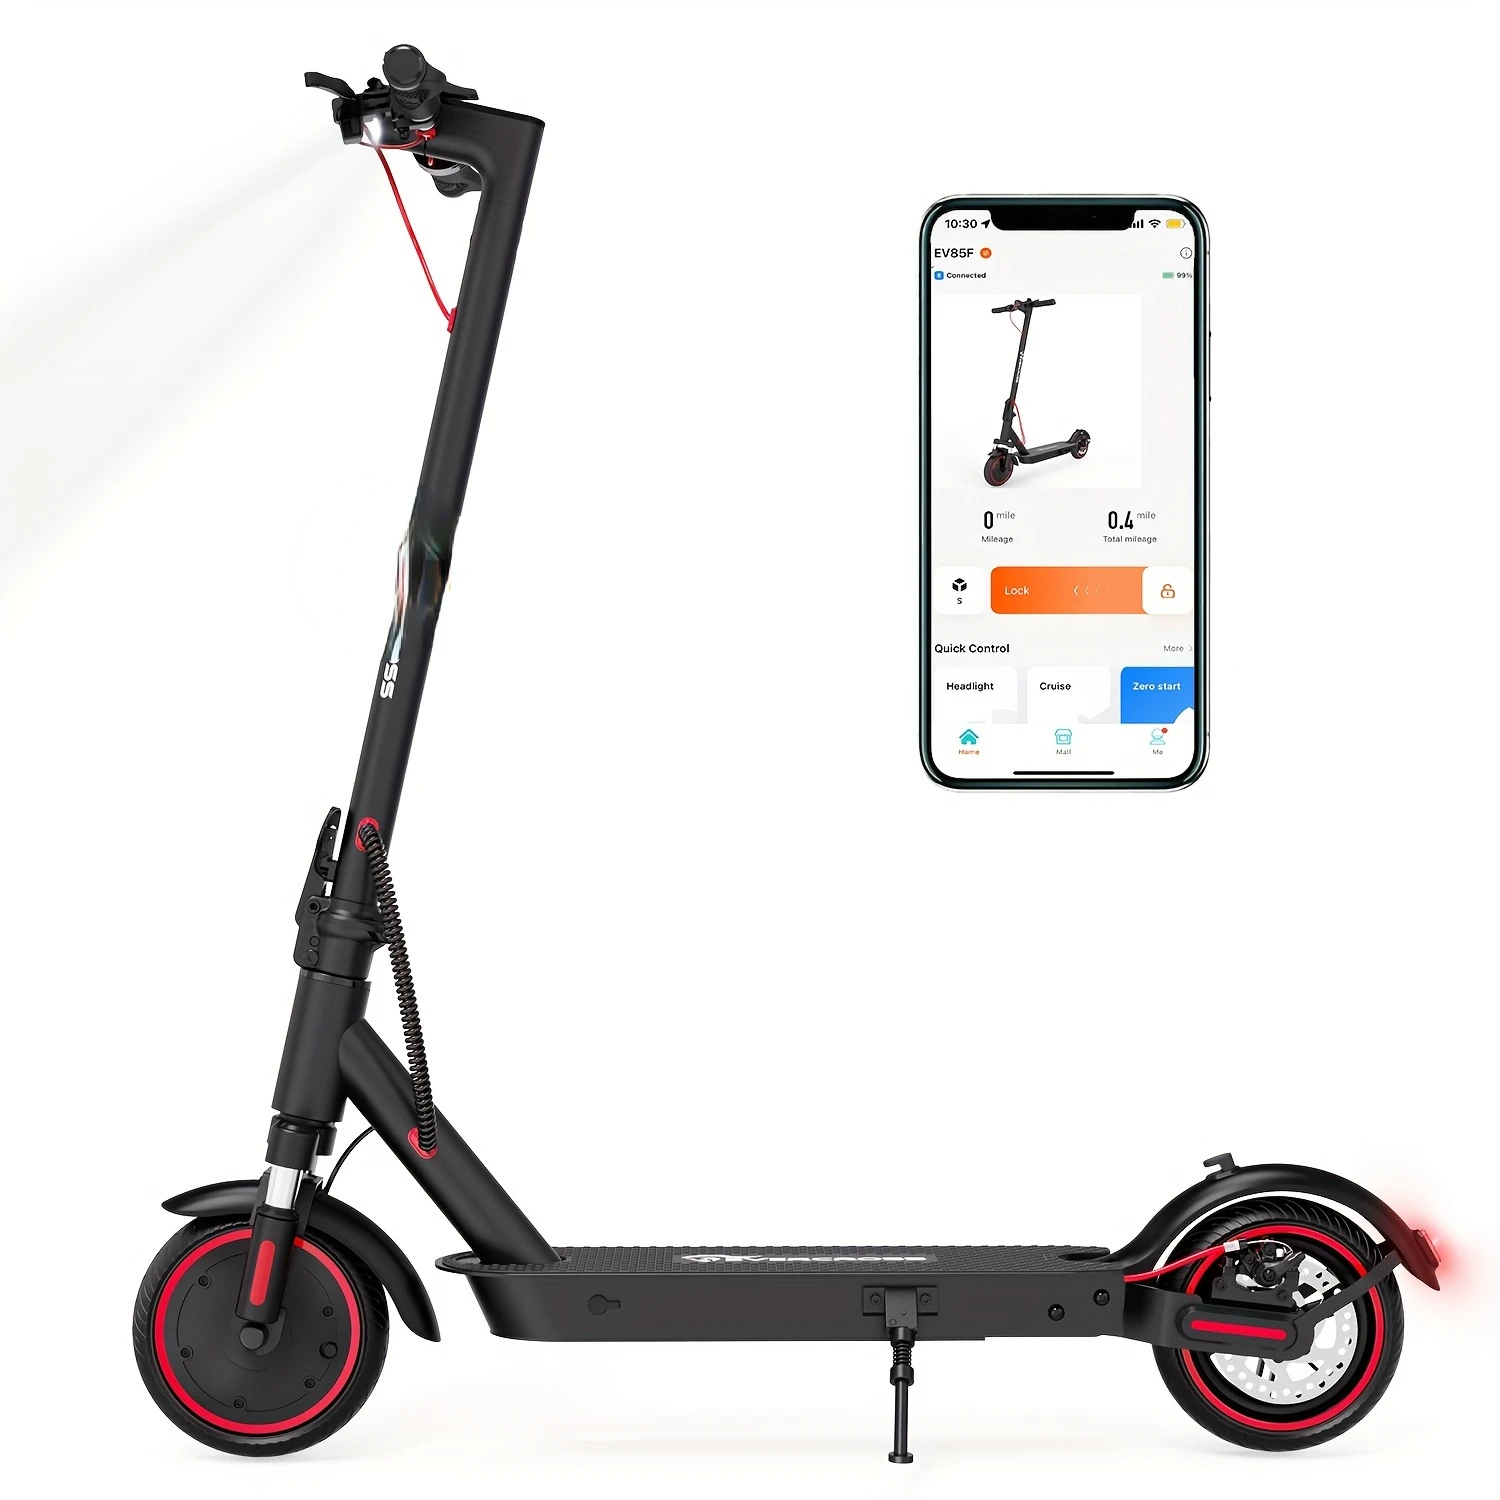 

SwiftRide Scooter-350W Motor, 19 MPH Max Speed, 19-Mile Range-Ultra-Portable, 8.5'' Tire, App Integration-Foldable Design for